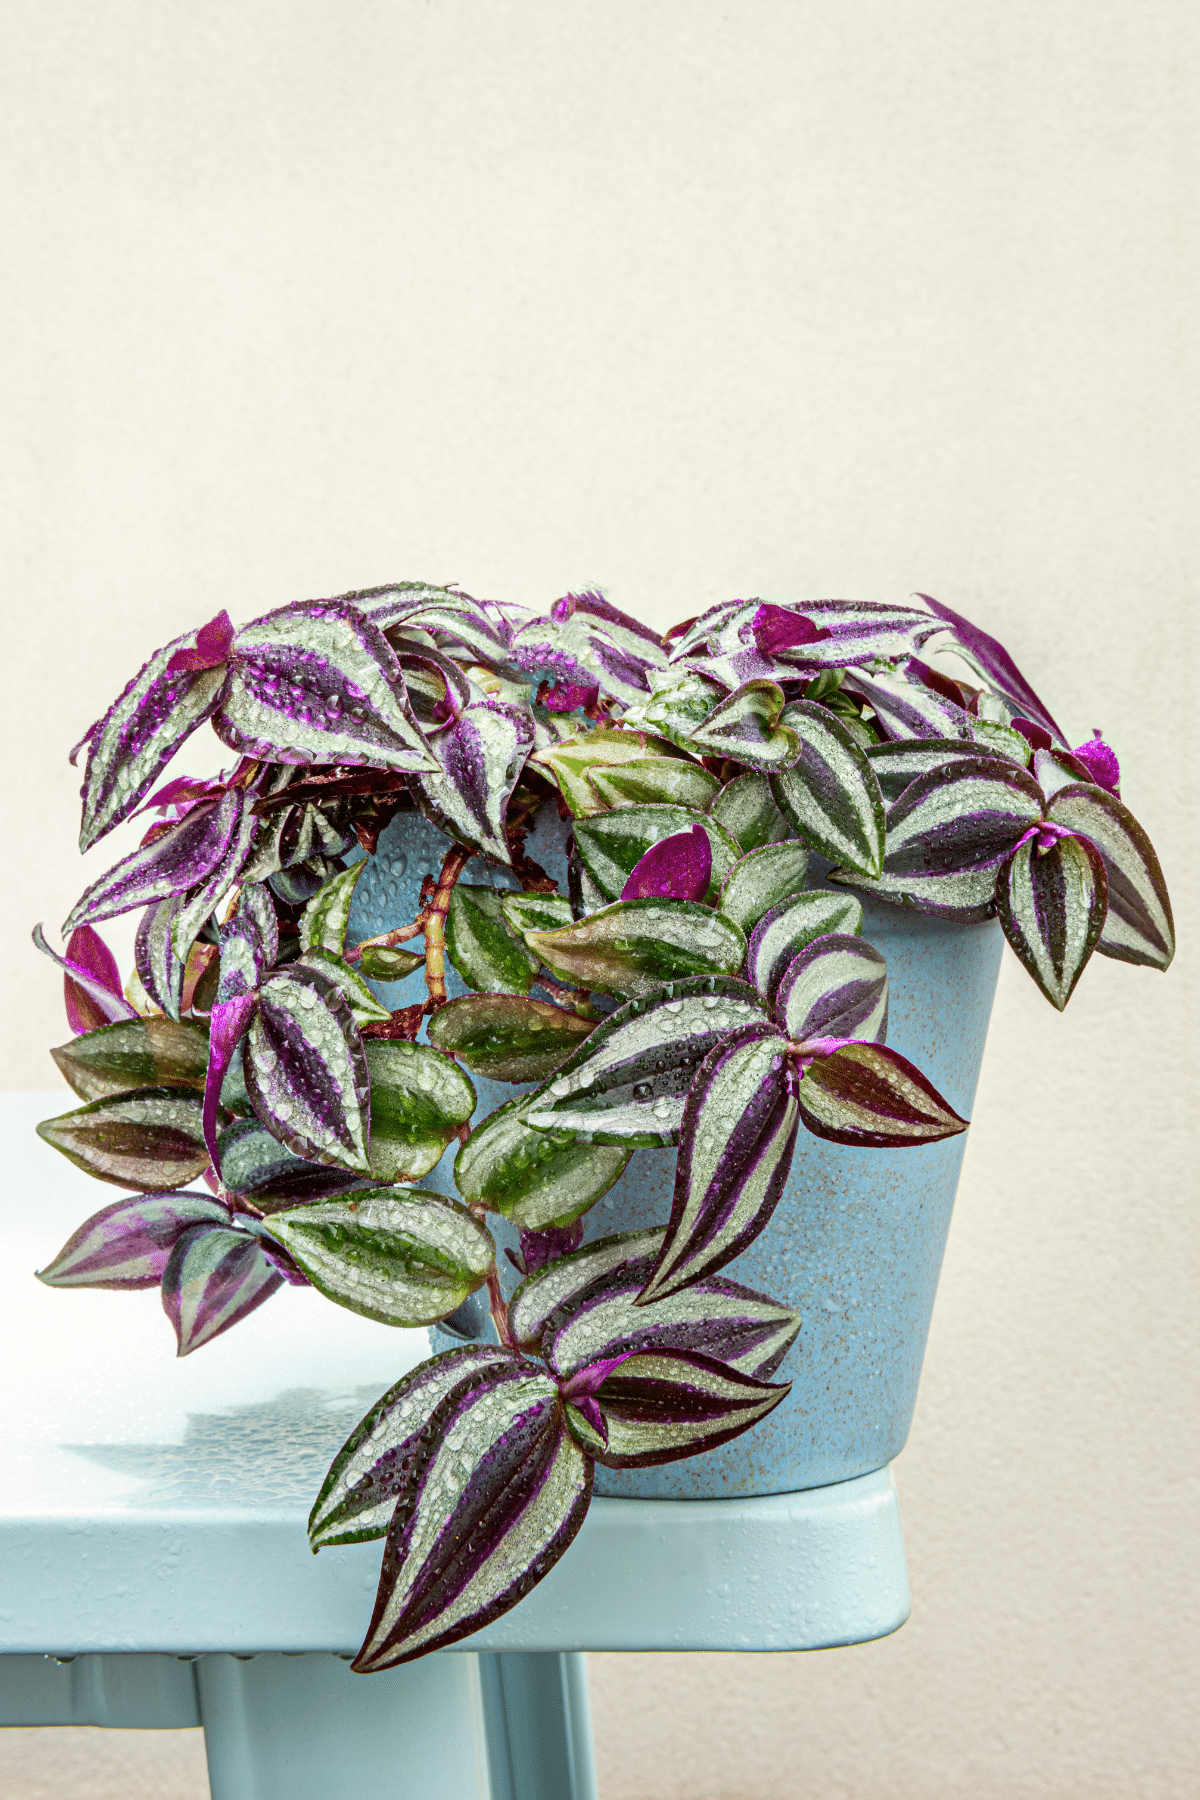 Vibrant Wandering Jew Plant in a blue pot sitting on a blue table.